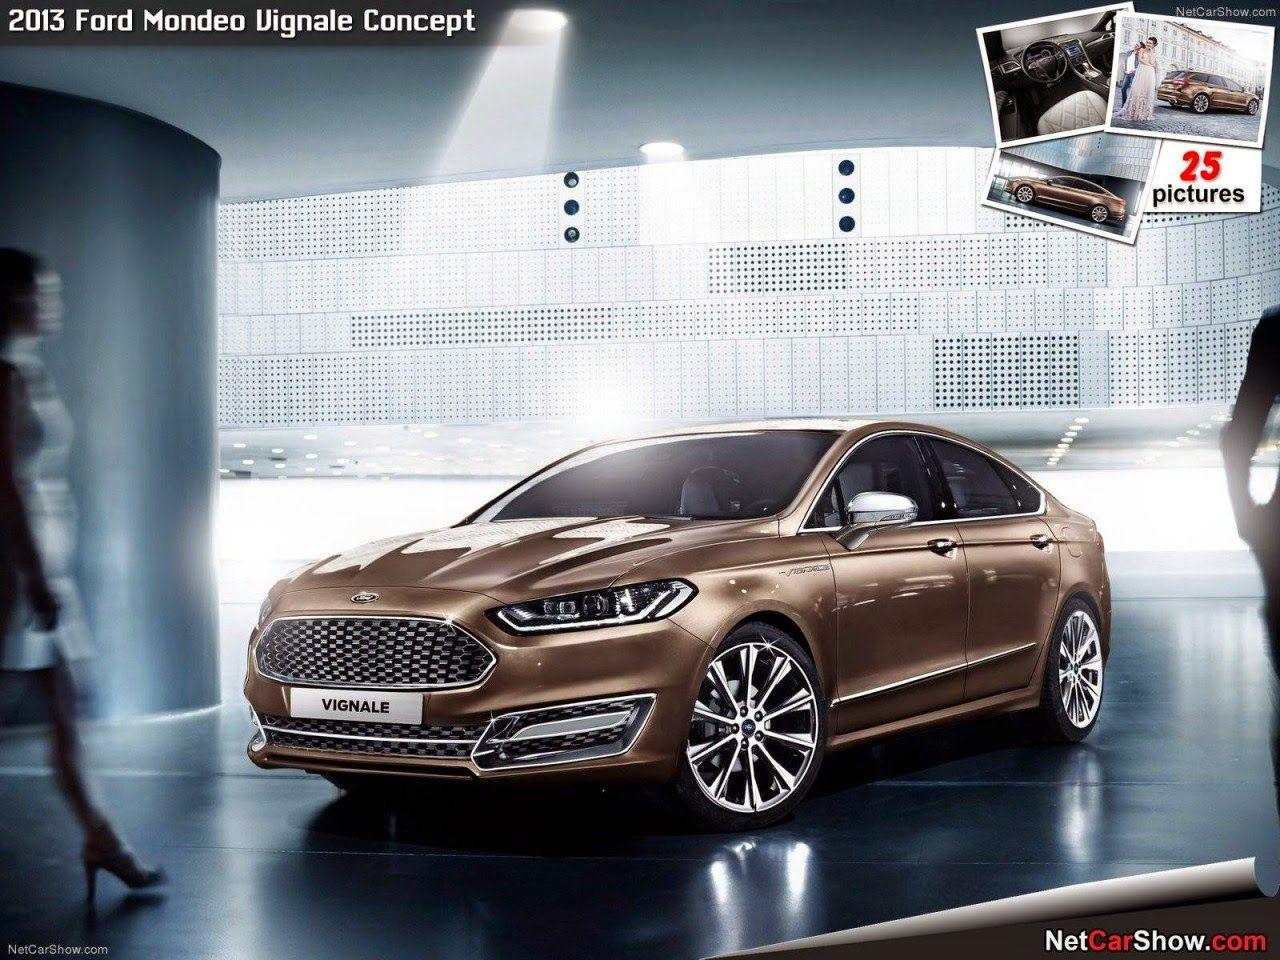 Ford Mondeo Vignale Wallpaper Gallery